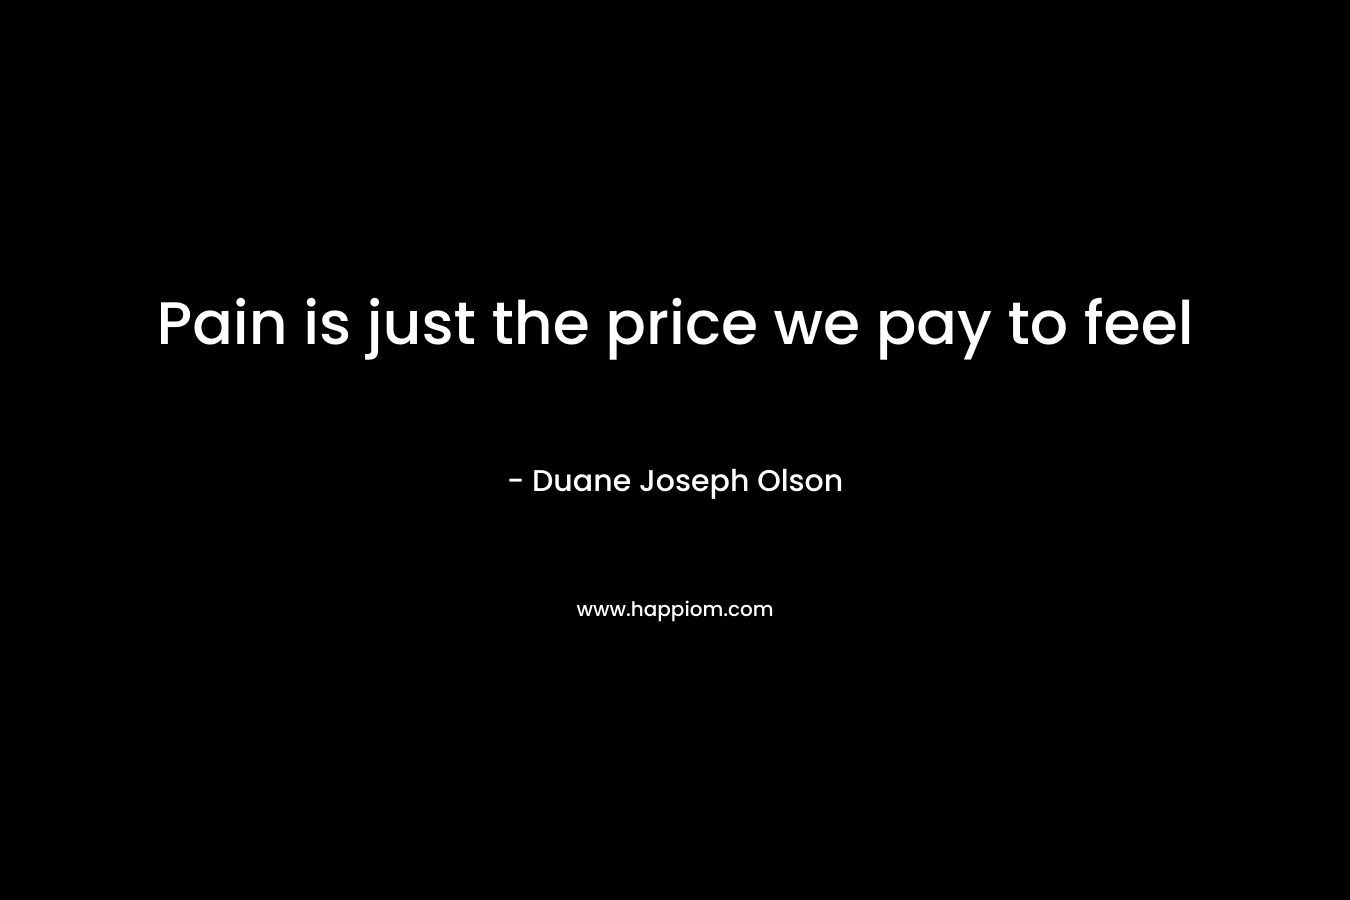 Pain is just the price we pay to feel